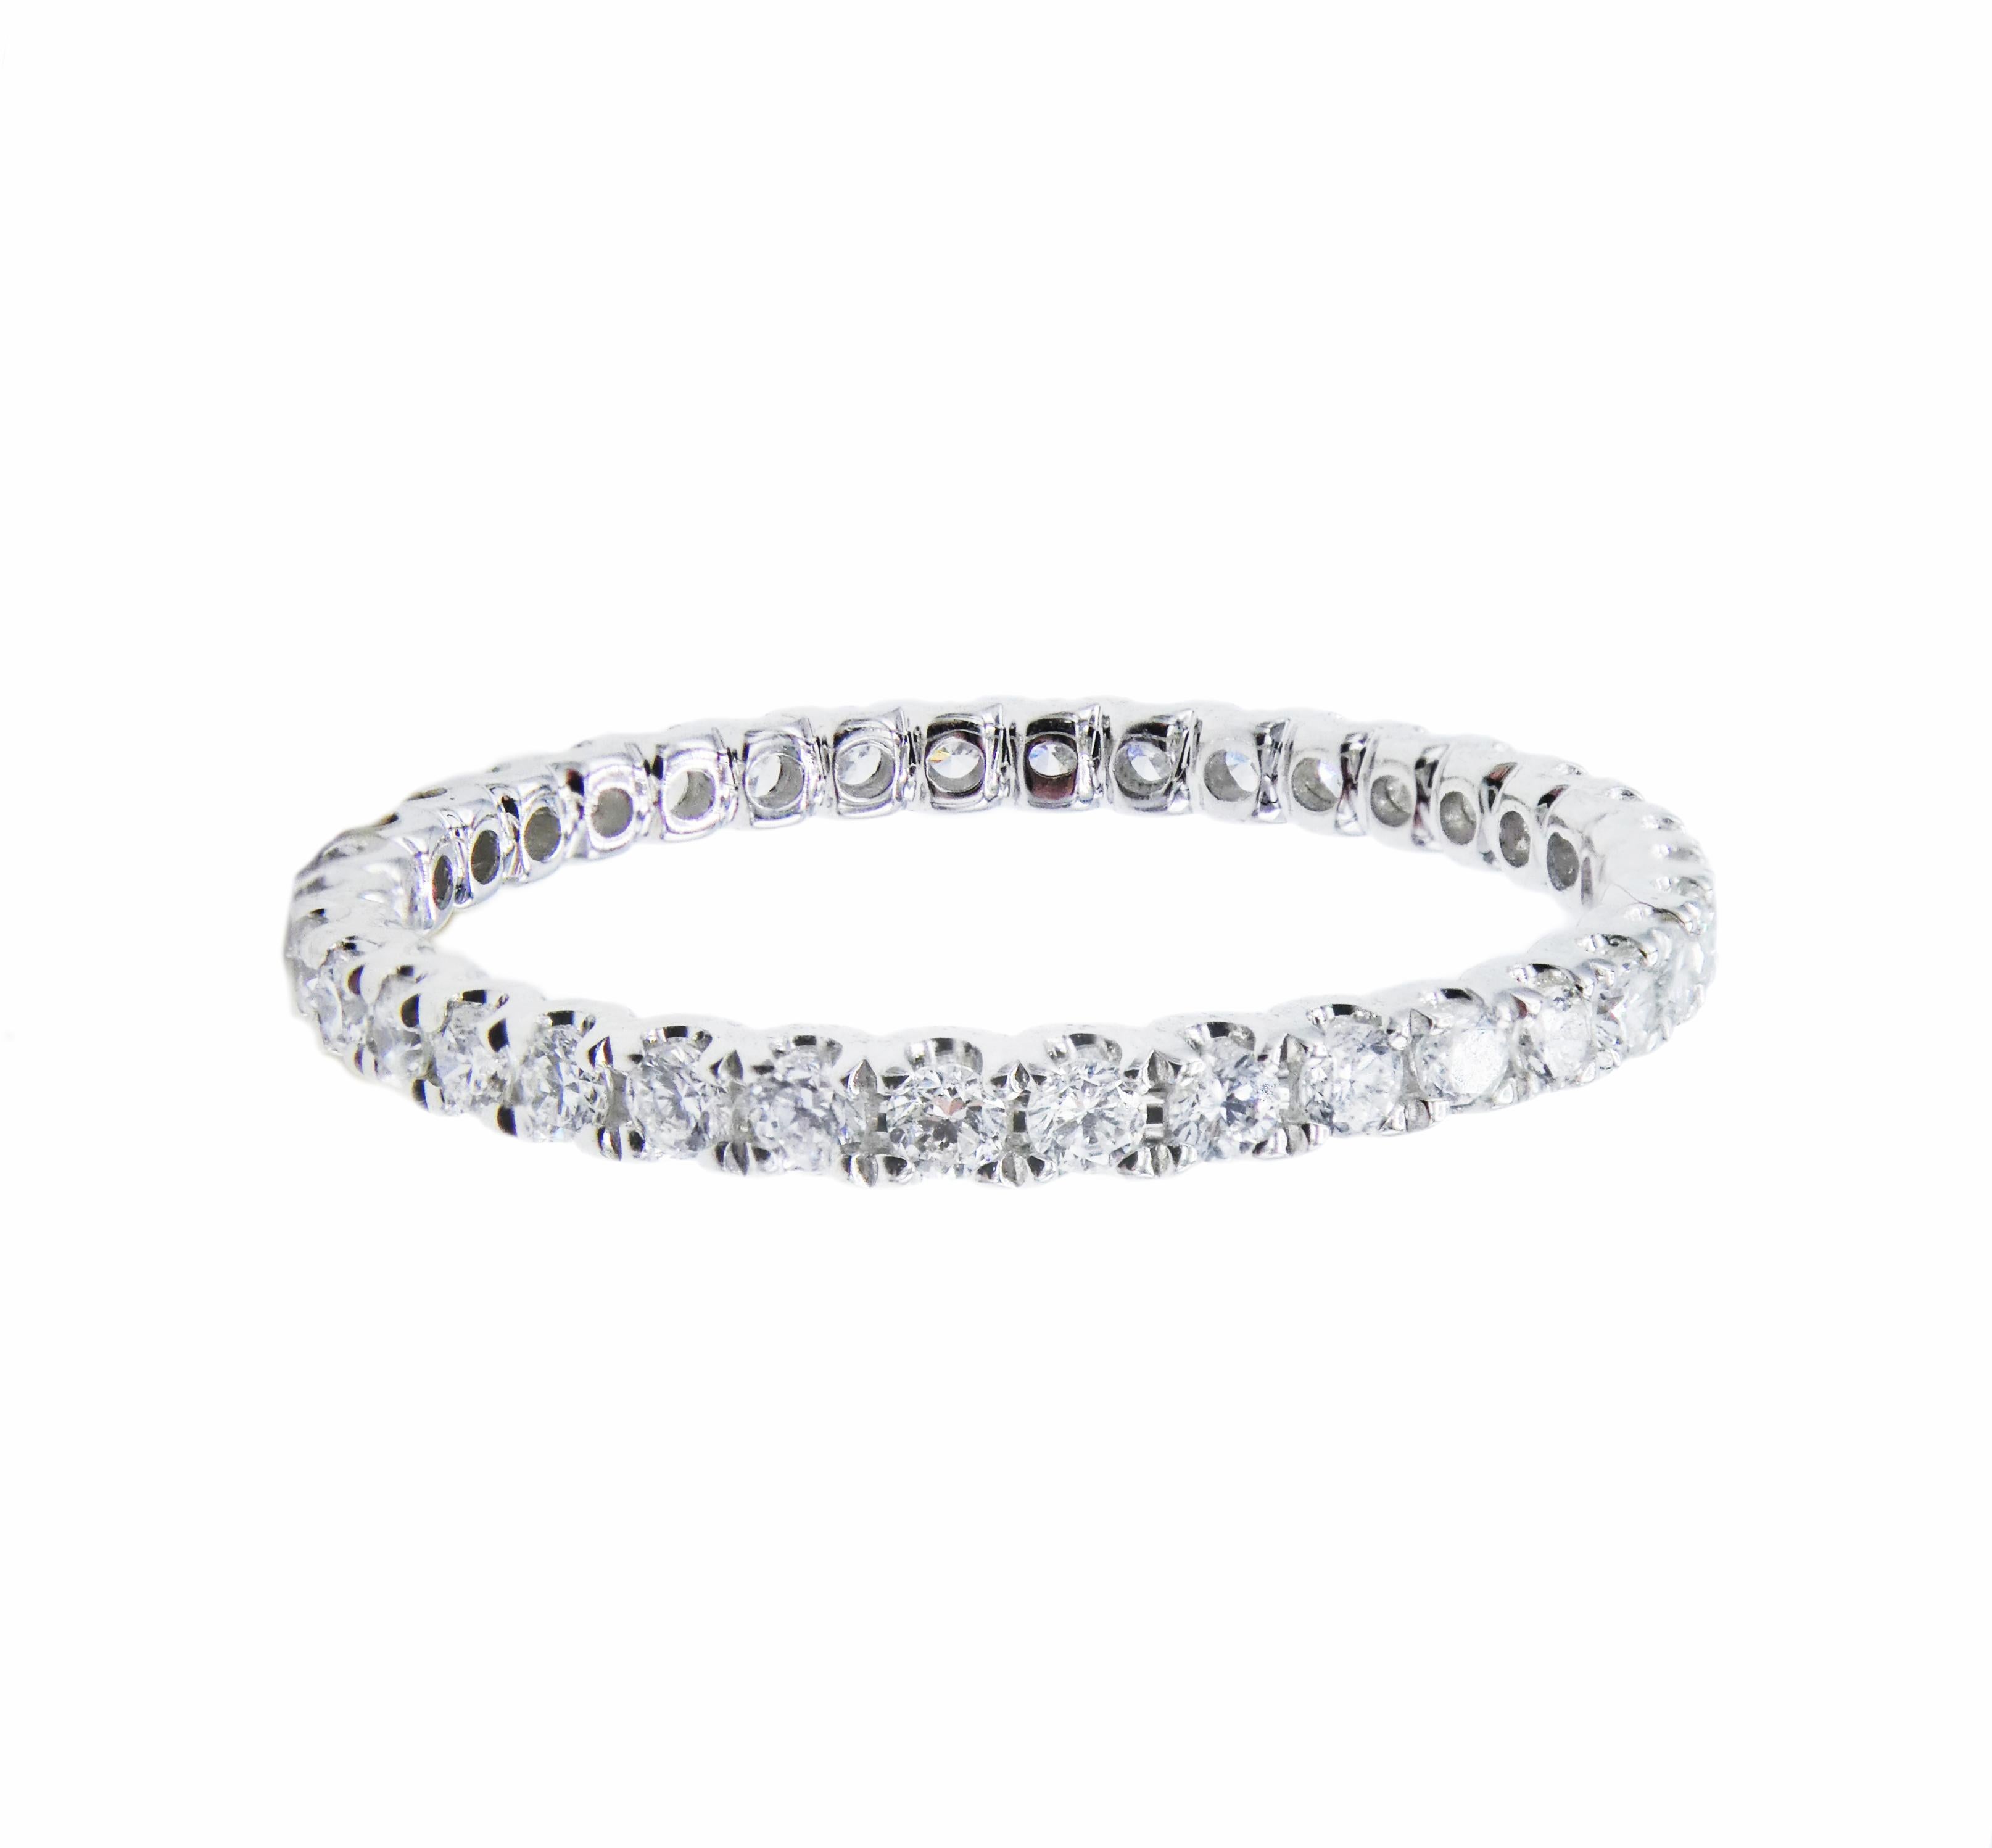 14k White Gold Natural Diamond 0.45 CTW Thin Eternity Wedding Band Round Natural Diamonds Ring Size 6

Metal: 14k White Gold
Diamonds: 36 round brilliant cut natural diamonds approx. 0.44 ctw G-H VS. 
Weight: 0.77 grams
Size: 6
Markings: Stamped